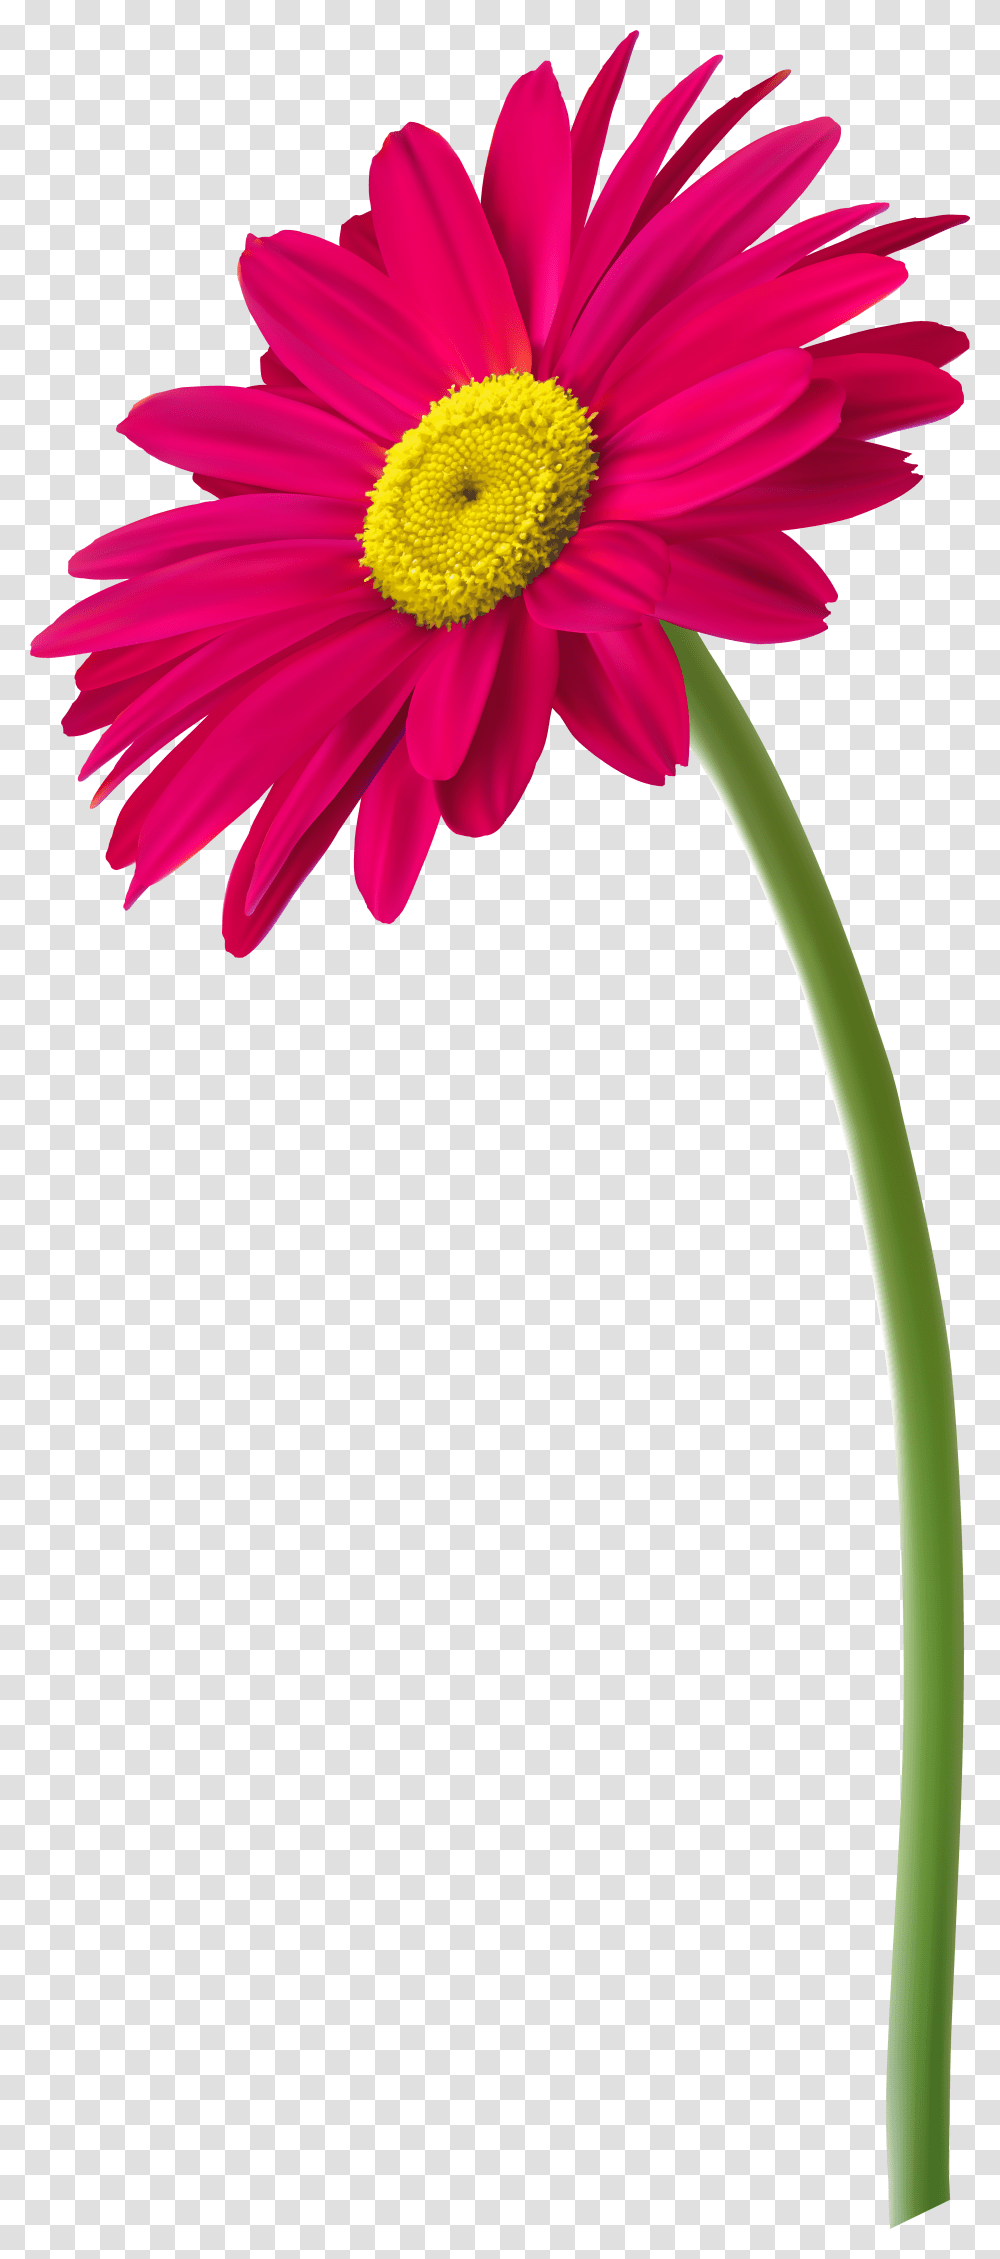 Field Of Flowers Flower With Pot, Plant, Blossom, Daisy, Daisies Transparent Png